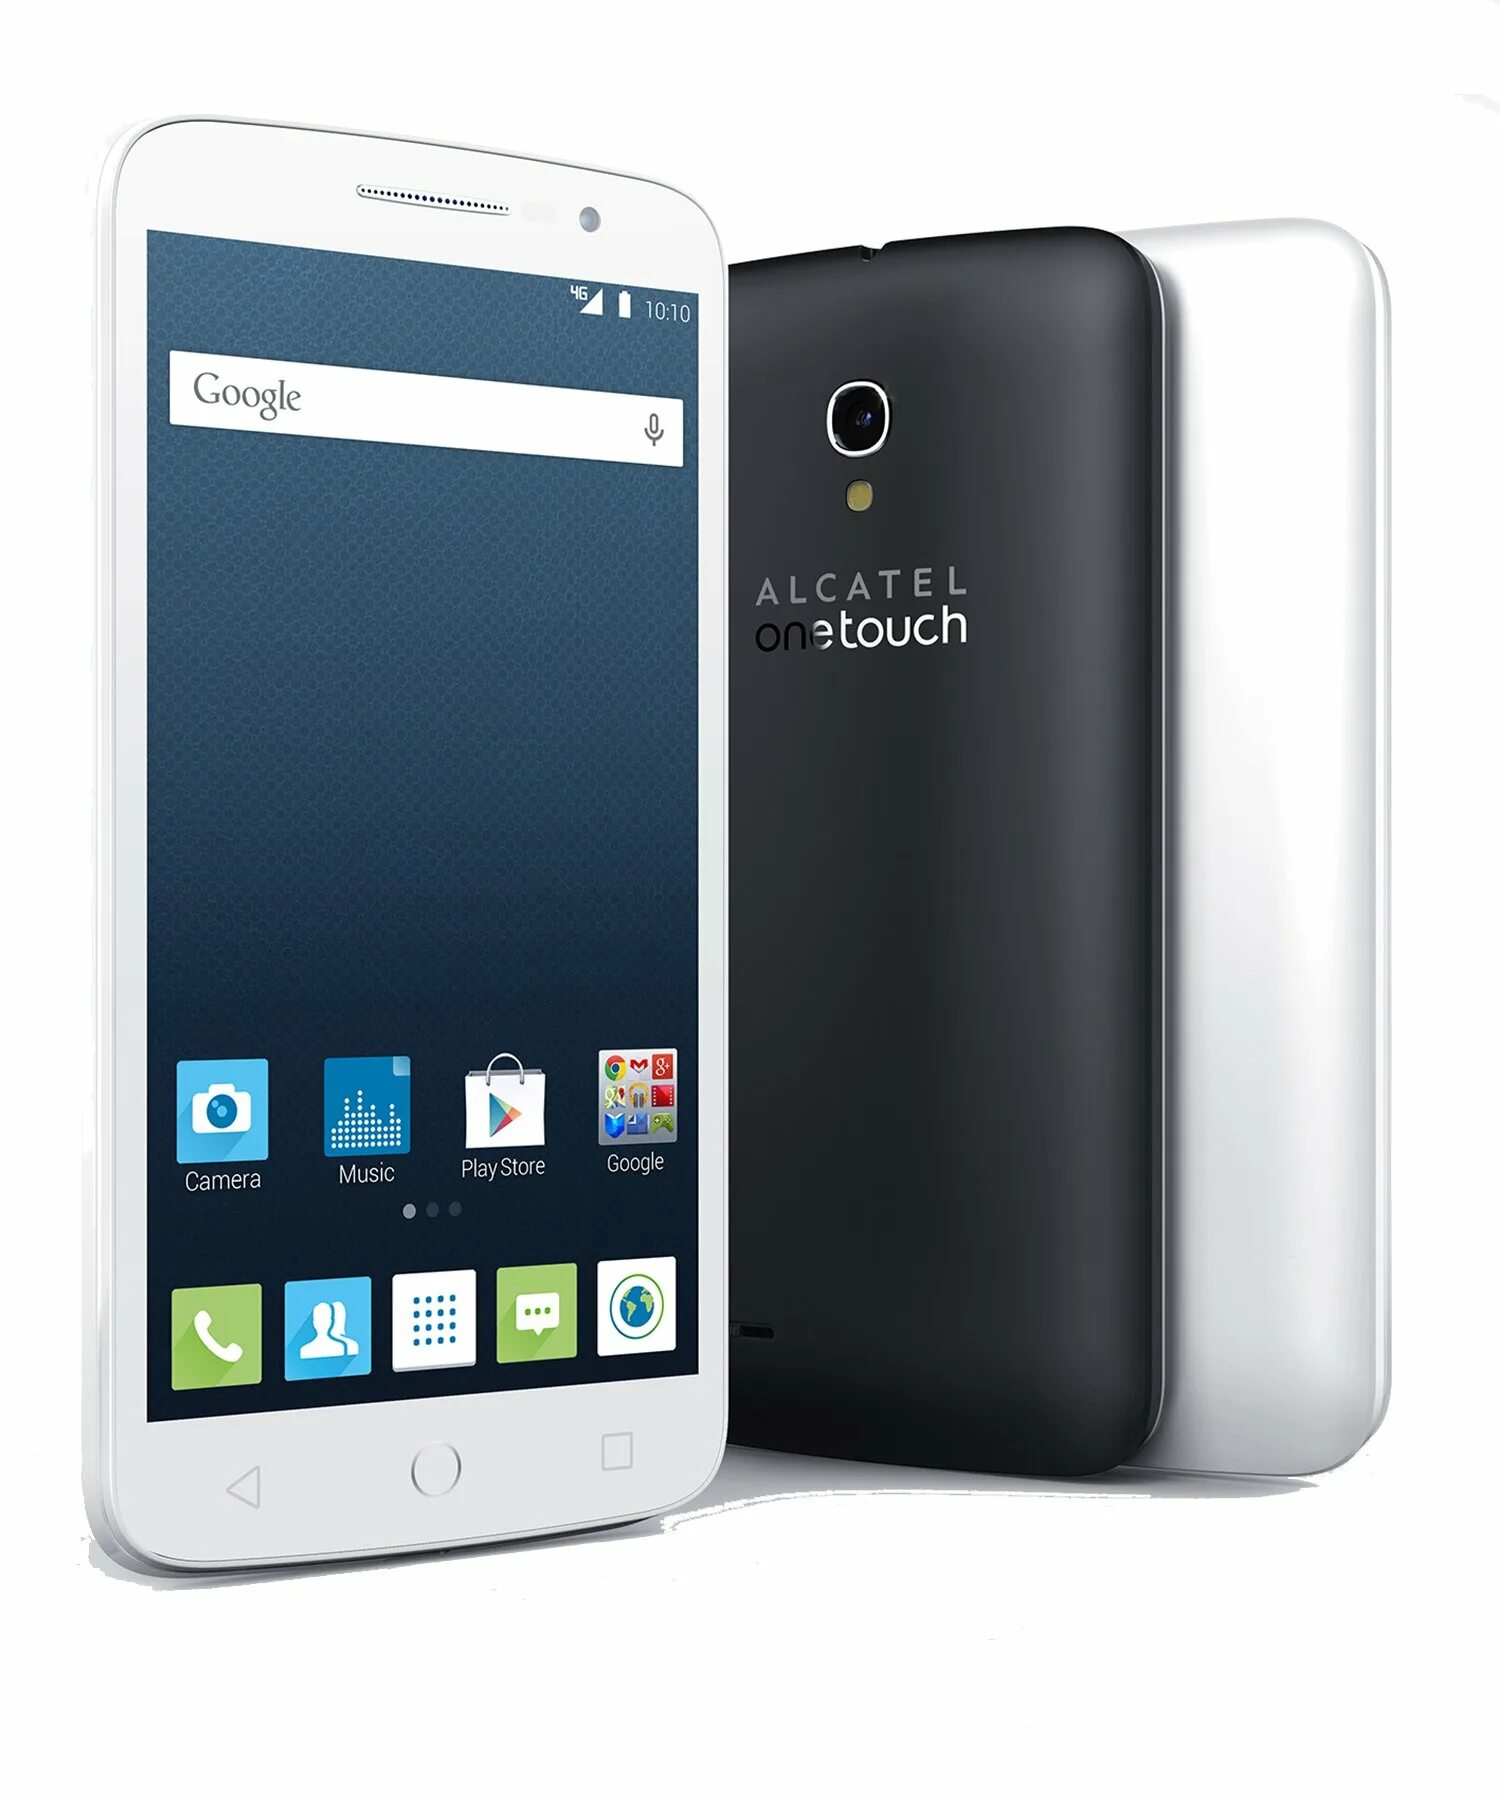 Alcatel one Touch Pop 2. Alcatel one Touch Pop 2 5. Alcatel one Touch 7043k. Alcatel one Touch Pop c5. Alcatel one touch 3